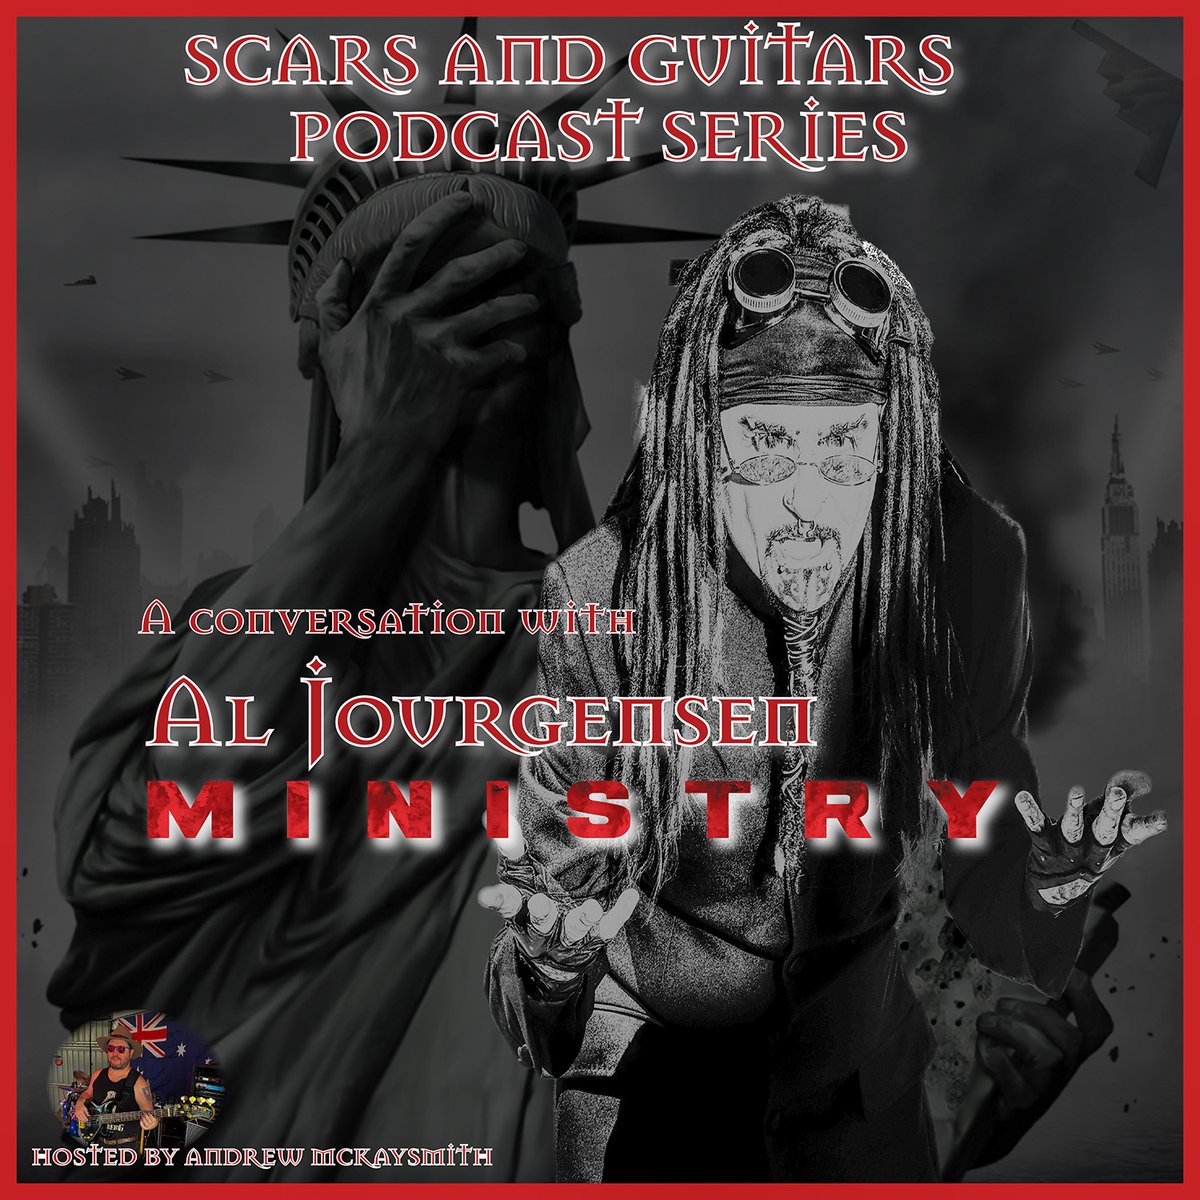 #throwback

In this chat, I'm joined by AlJourgensen! We discuss Ministry's album 'AmeriKKKant' launch, reflect on the 1996 epic, 'Filthpig,' and delve into engaging political topics. I hope to chat with Al again! #AlJourgensen #Ministry #AmeriKKKant

scarsandguitars.com/al-jourgensen-…